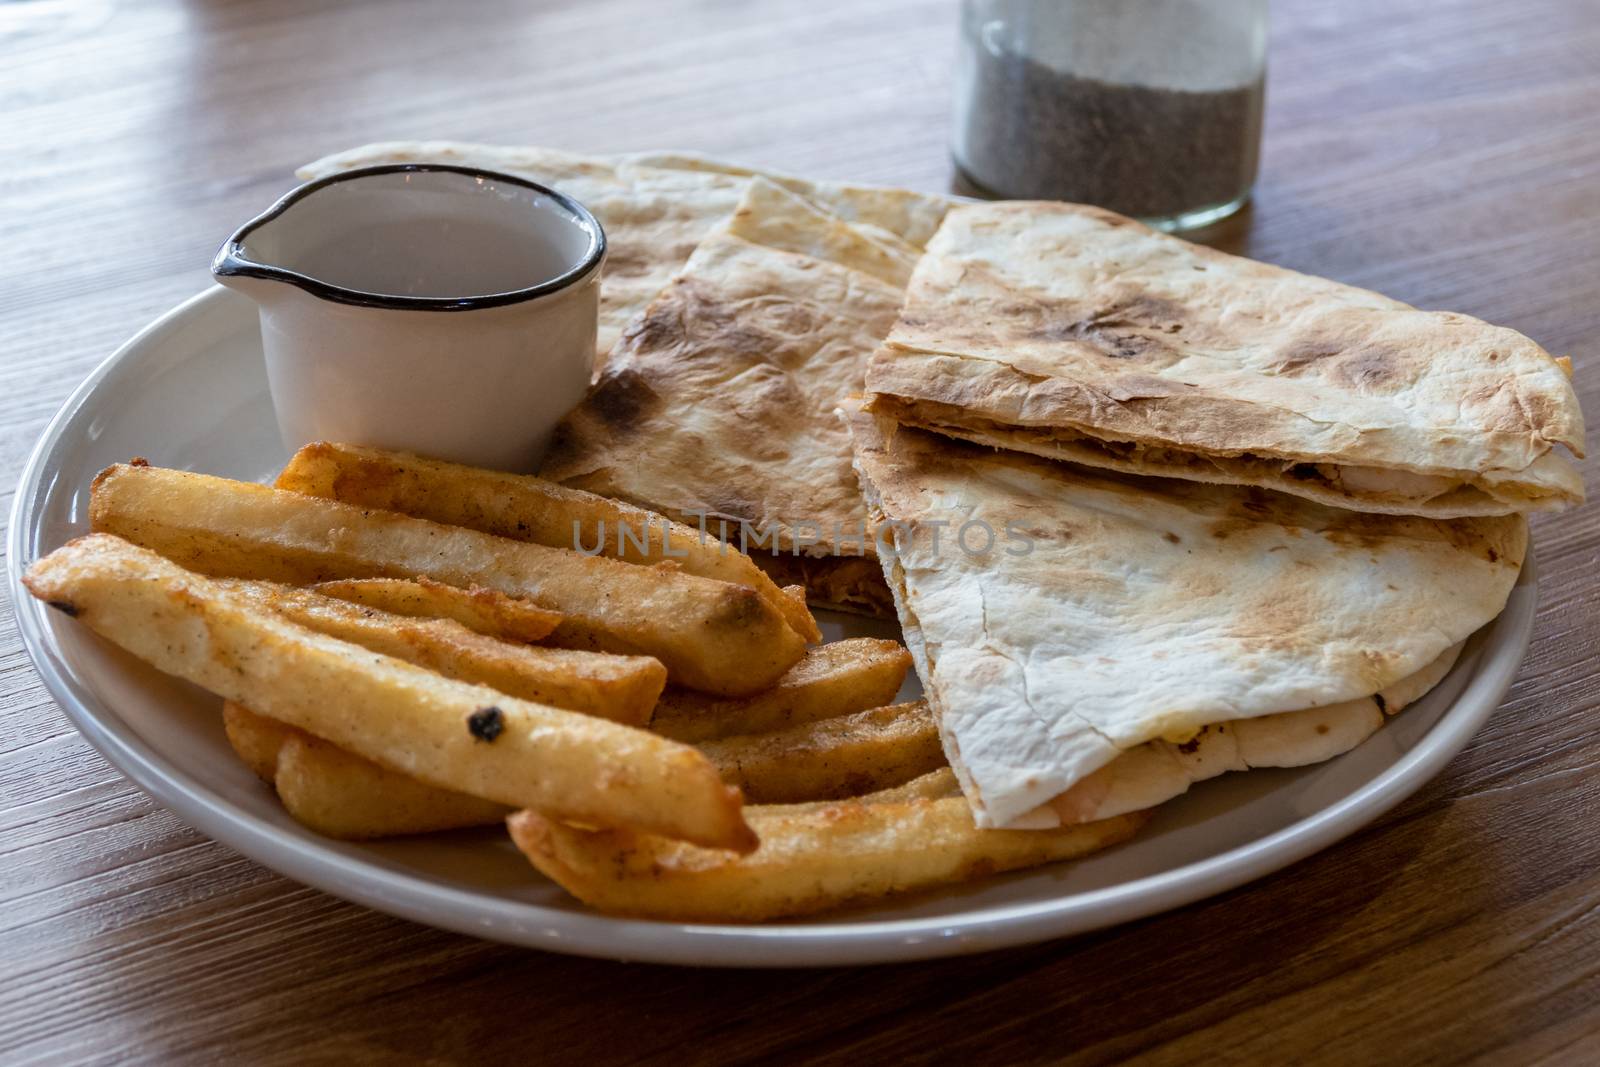 Quesadilla and french fries on plate